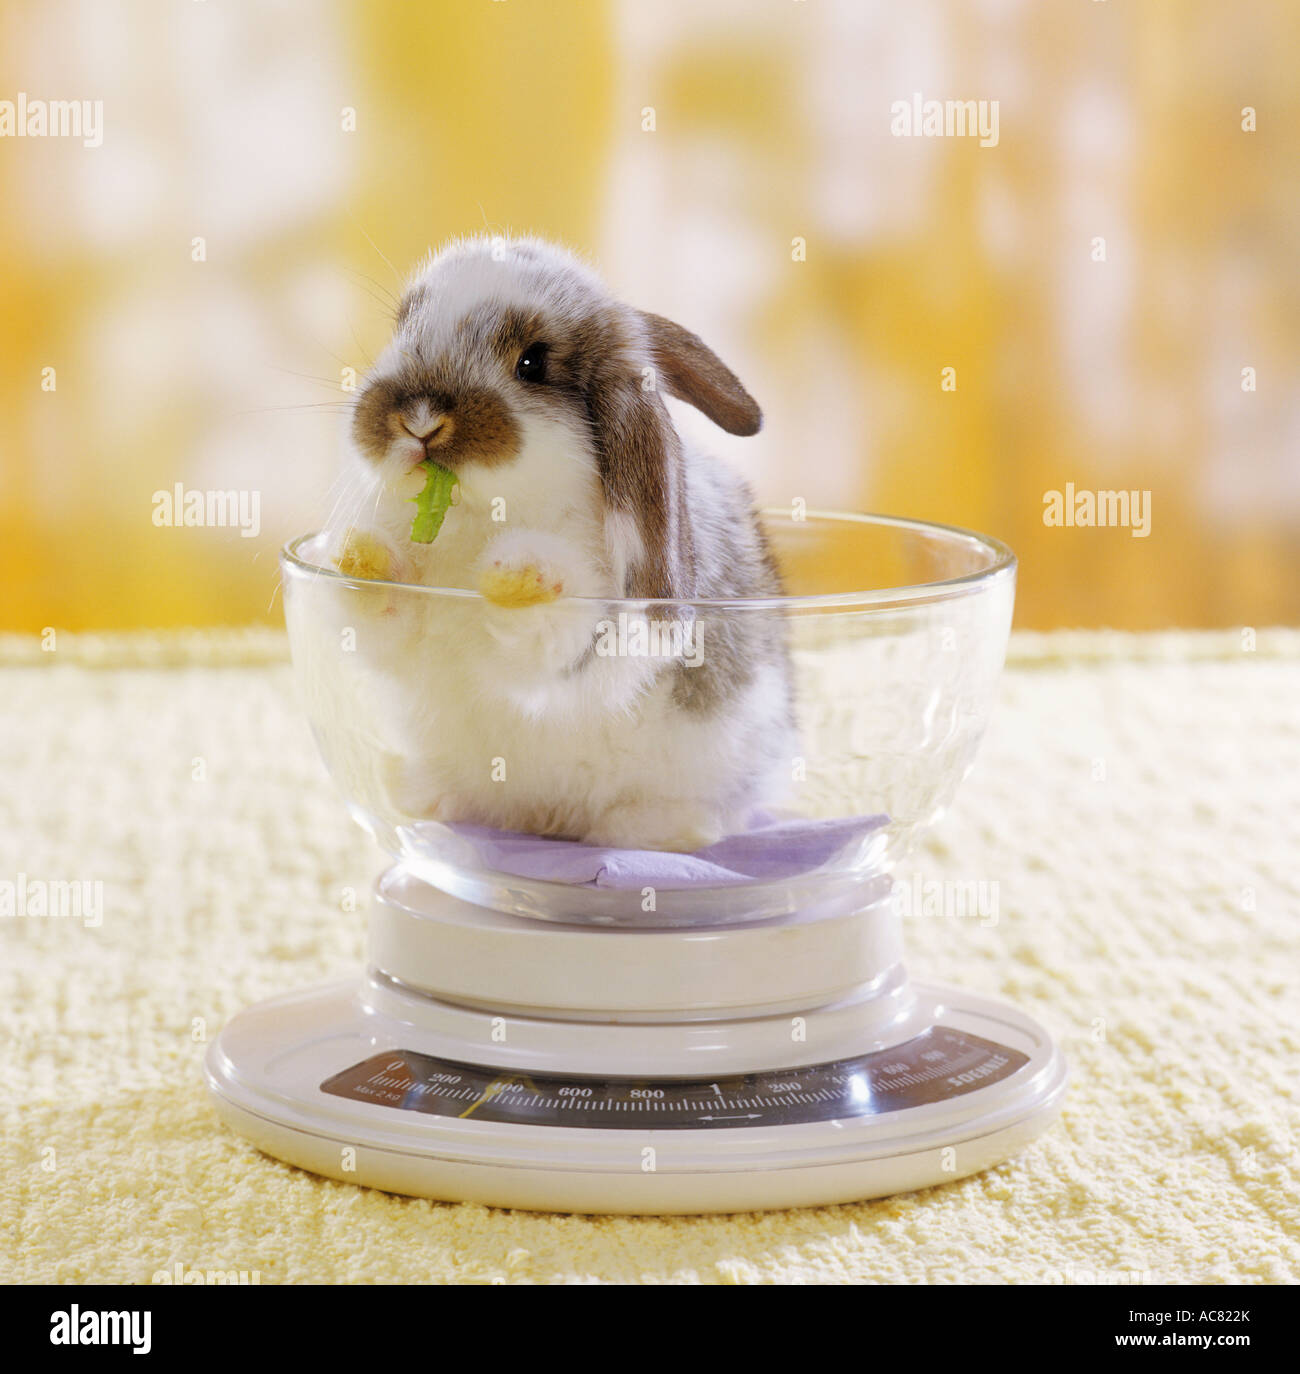 Cute Lop Rabbit Weighing Scale Stock Image - Image of matter